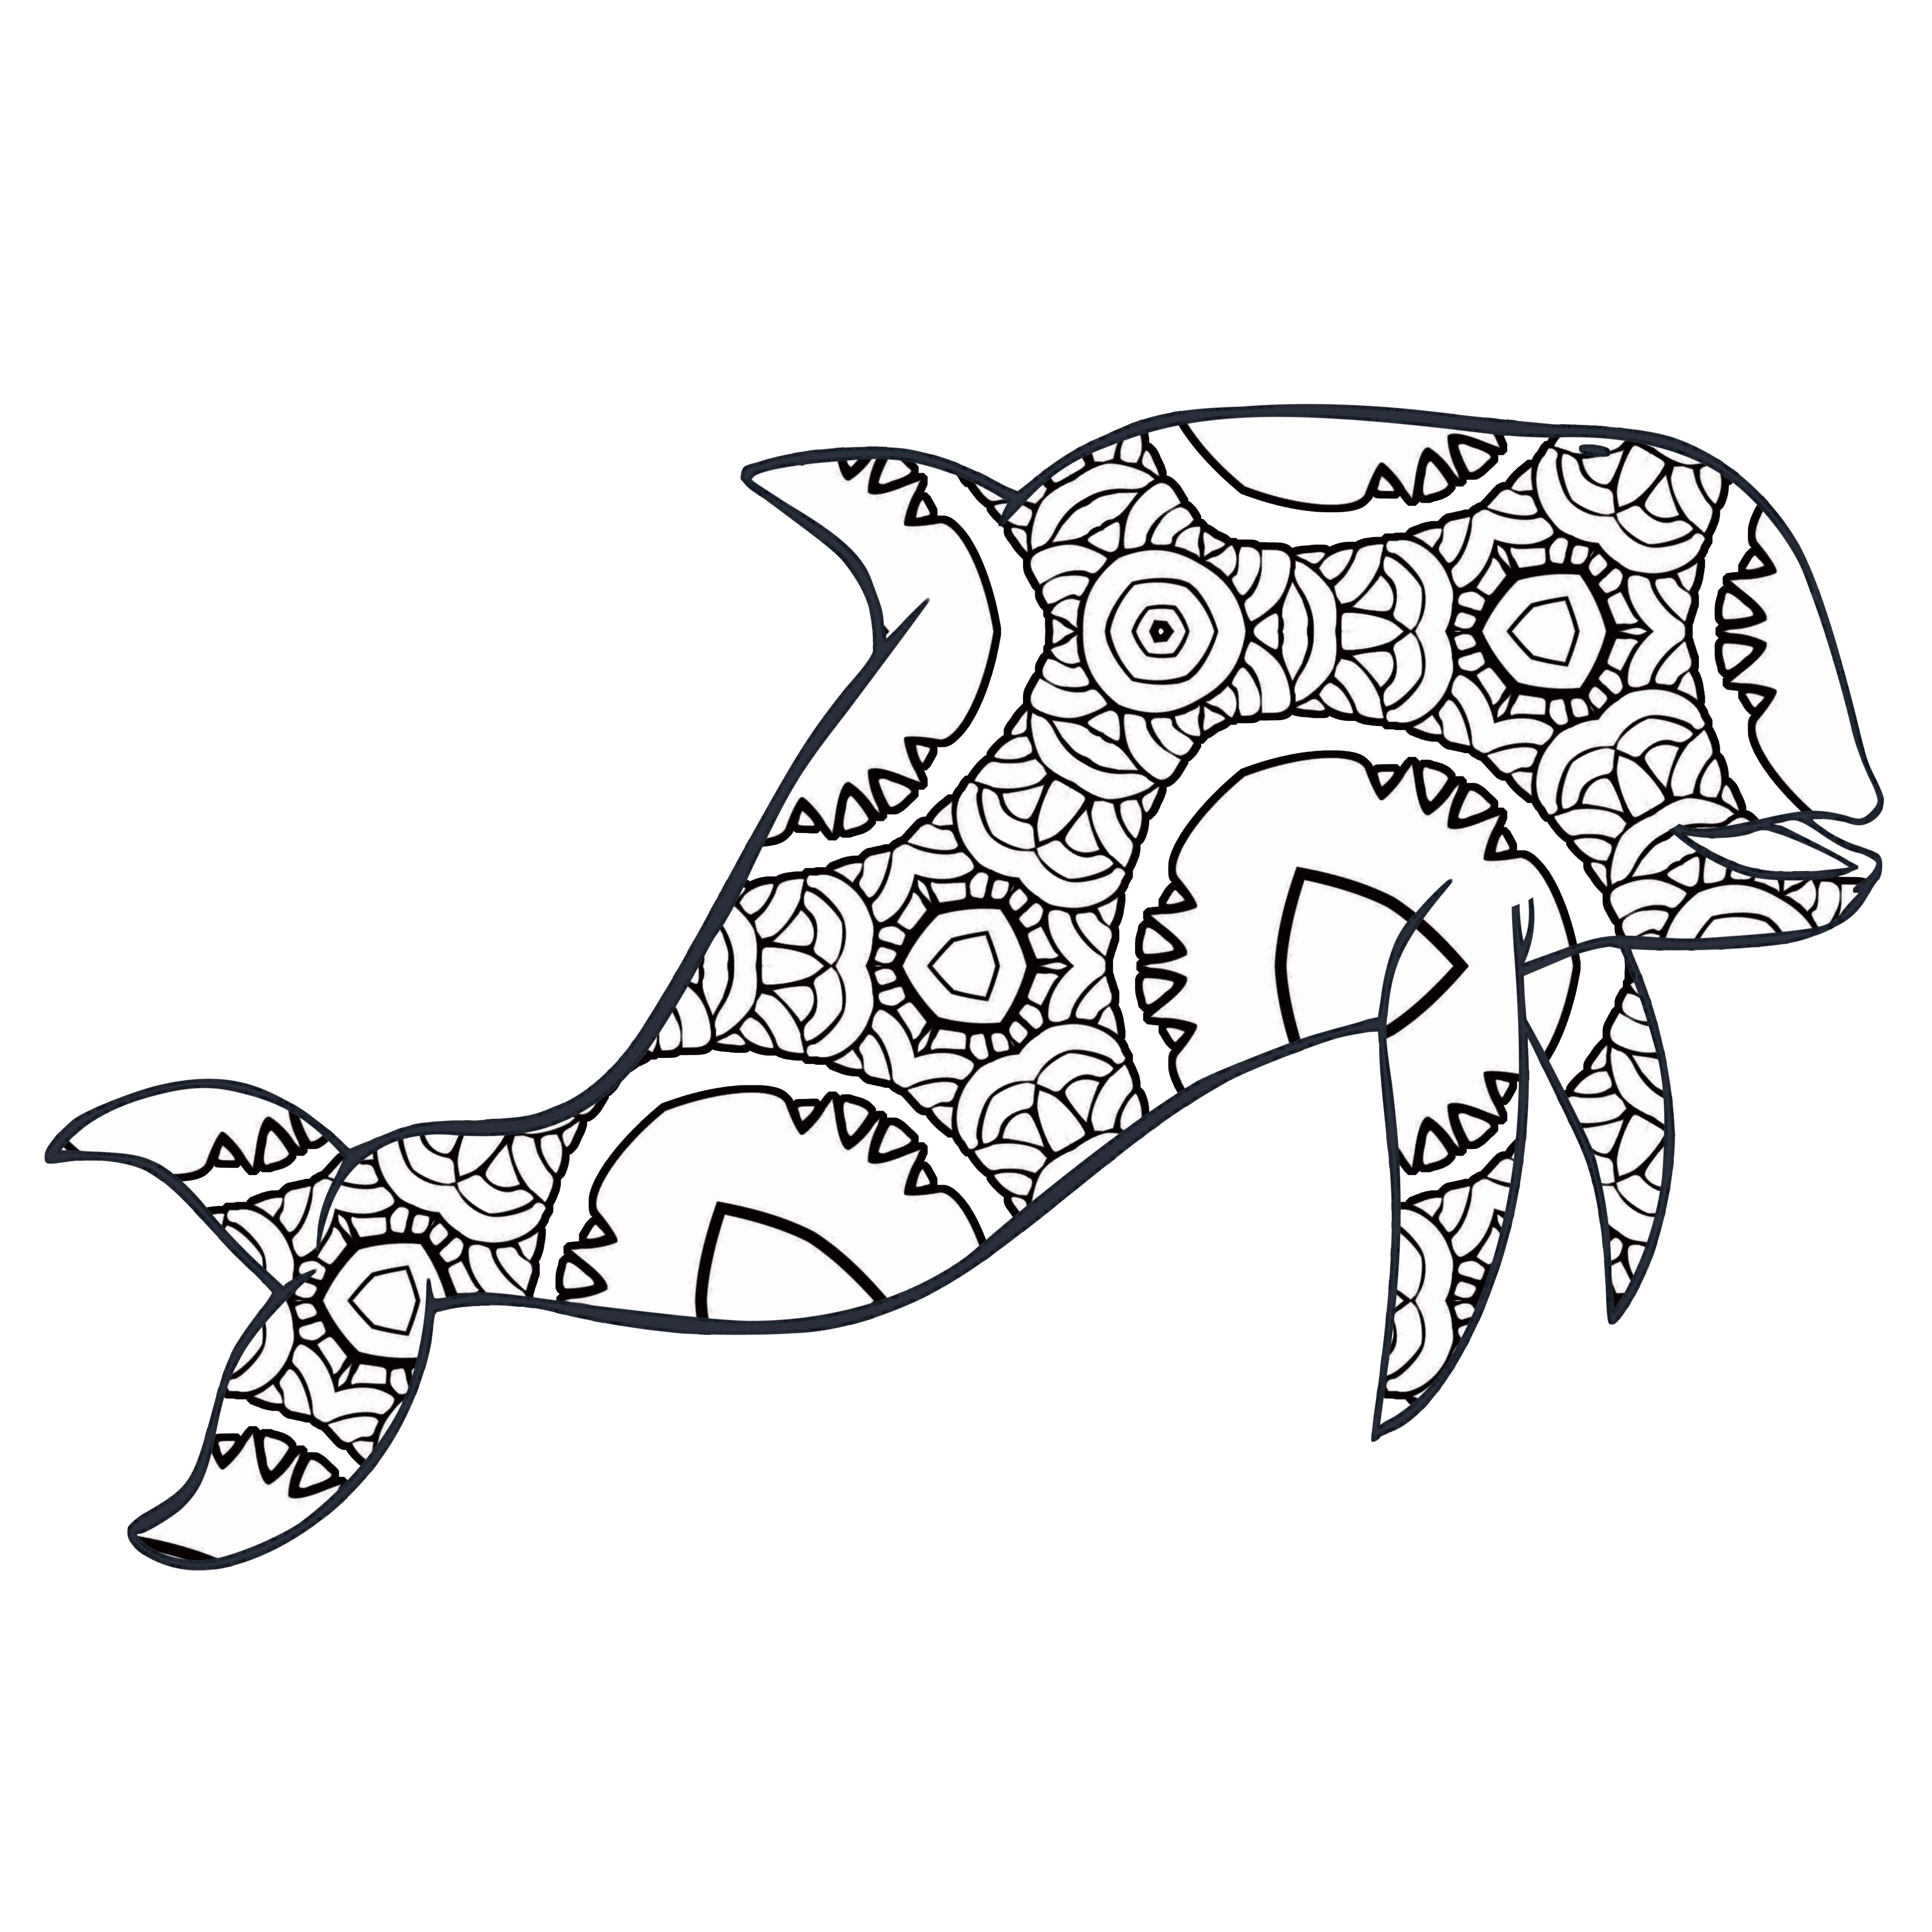 20 Free Printable Geometric Animal Coloring Pages   The Cottage Market